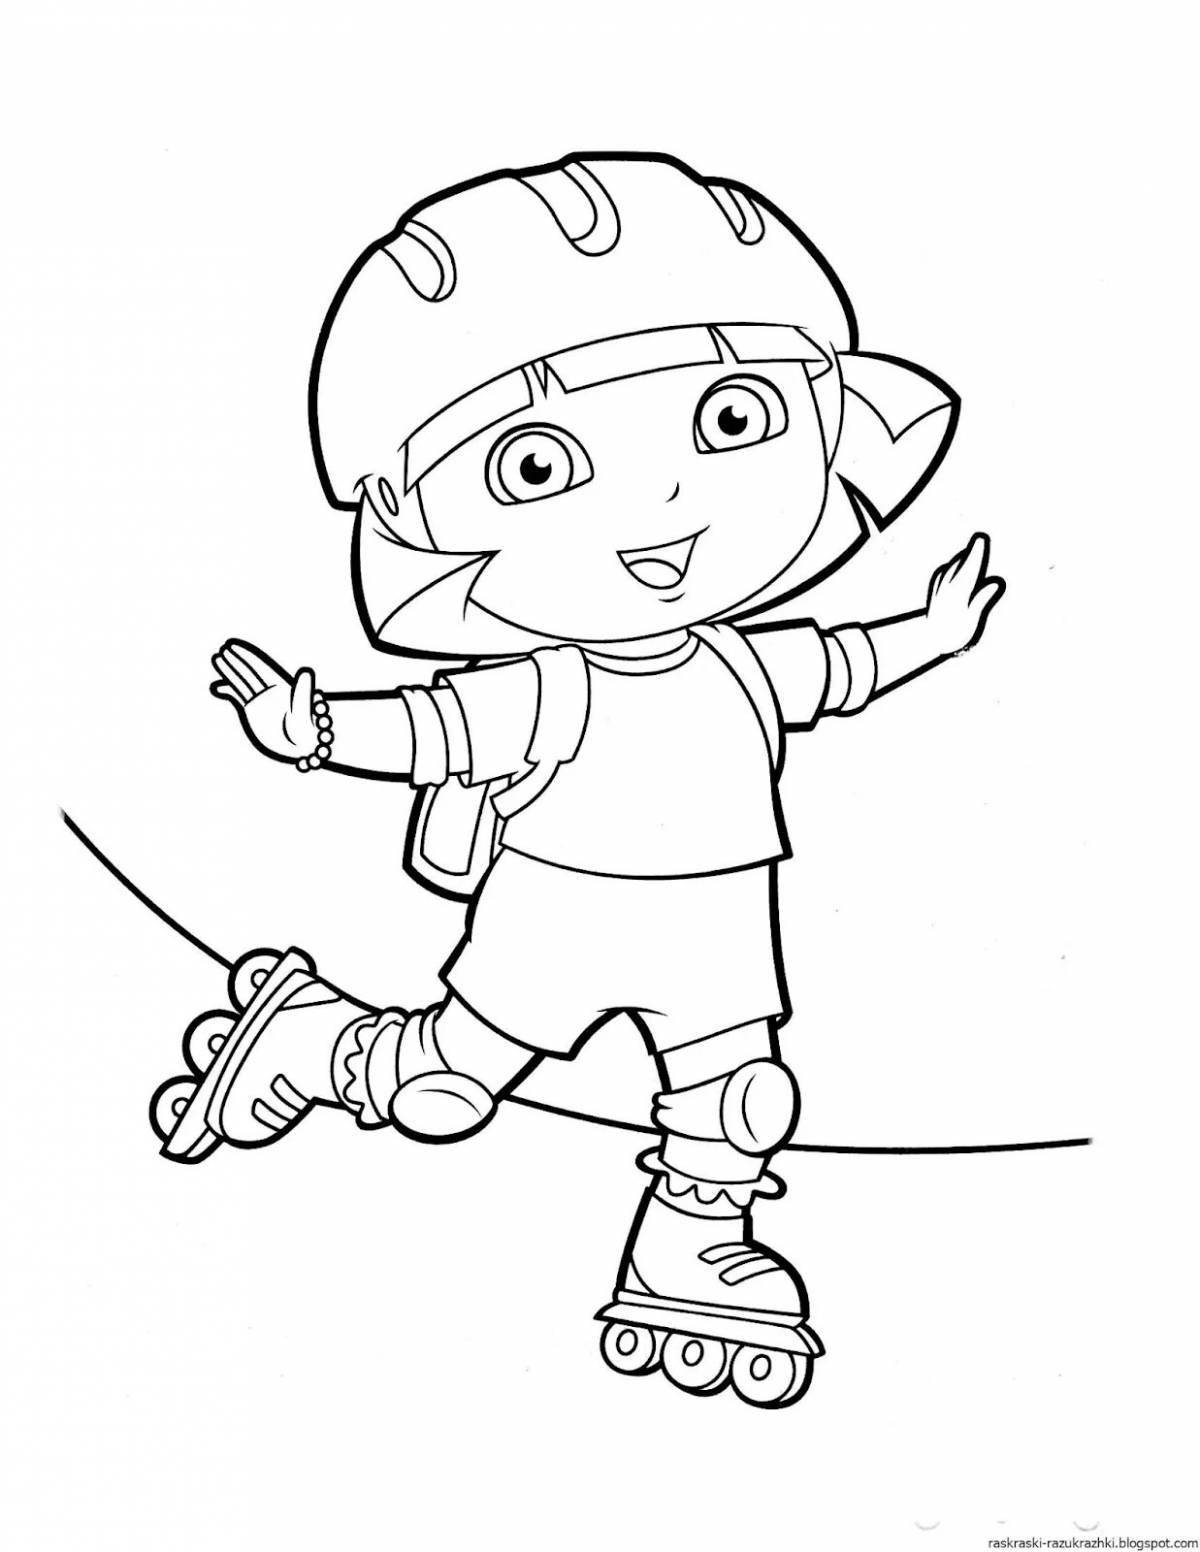 Sweet sports coloring pages for kids 5-6 years old